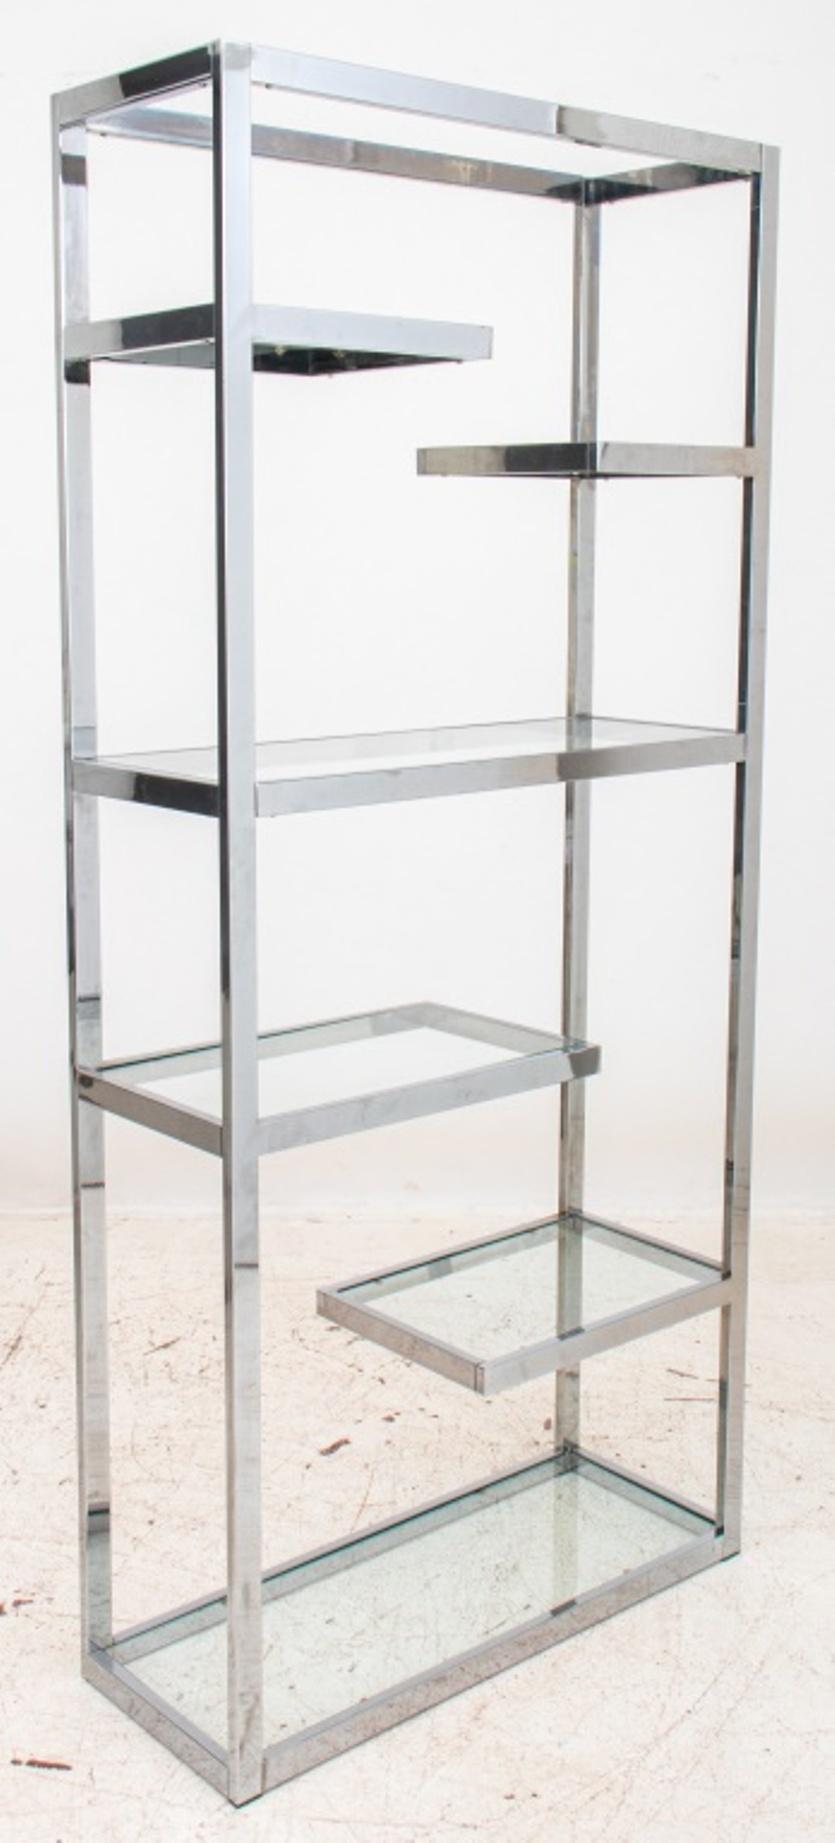 Romeo Rega style modern chrome and glass shelves. In good condition. Wear consistent with age and use. Acquired from a Manhattan estate. 
Dimensions: 78